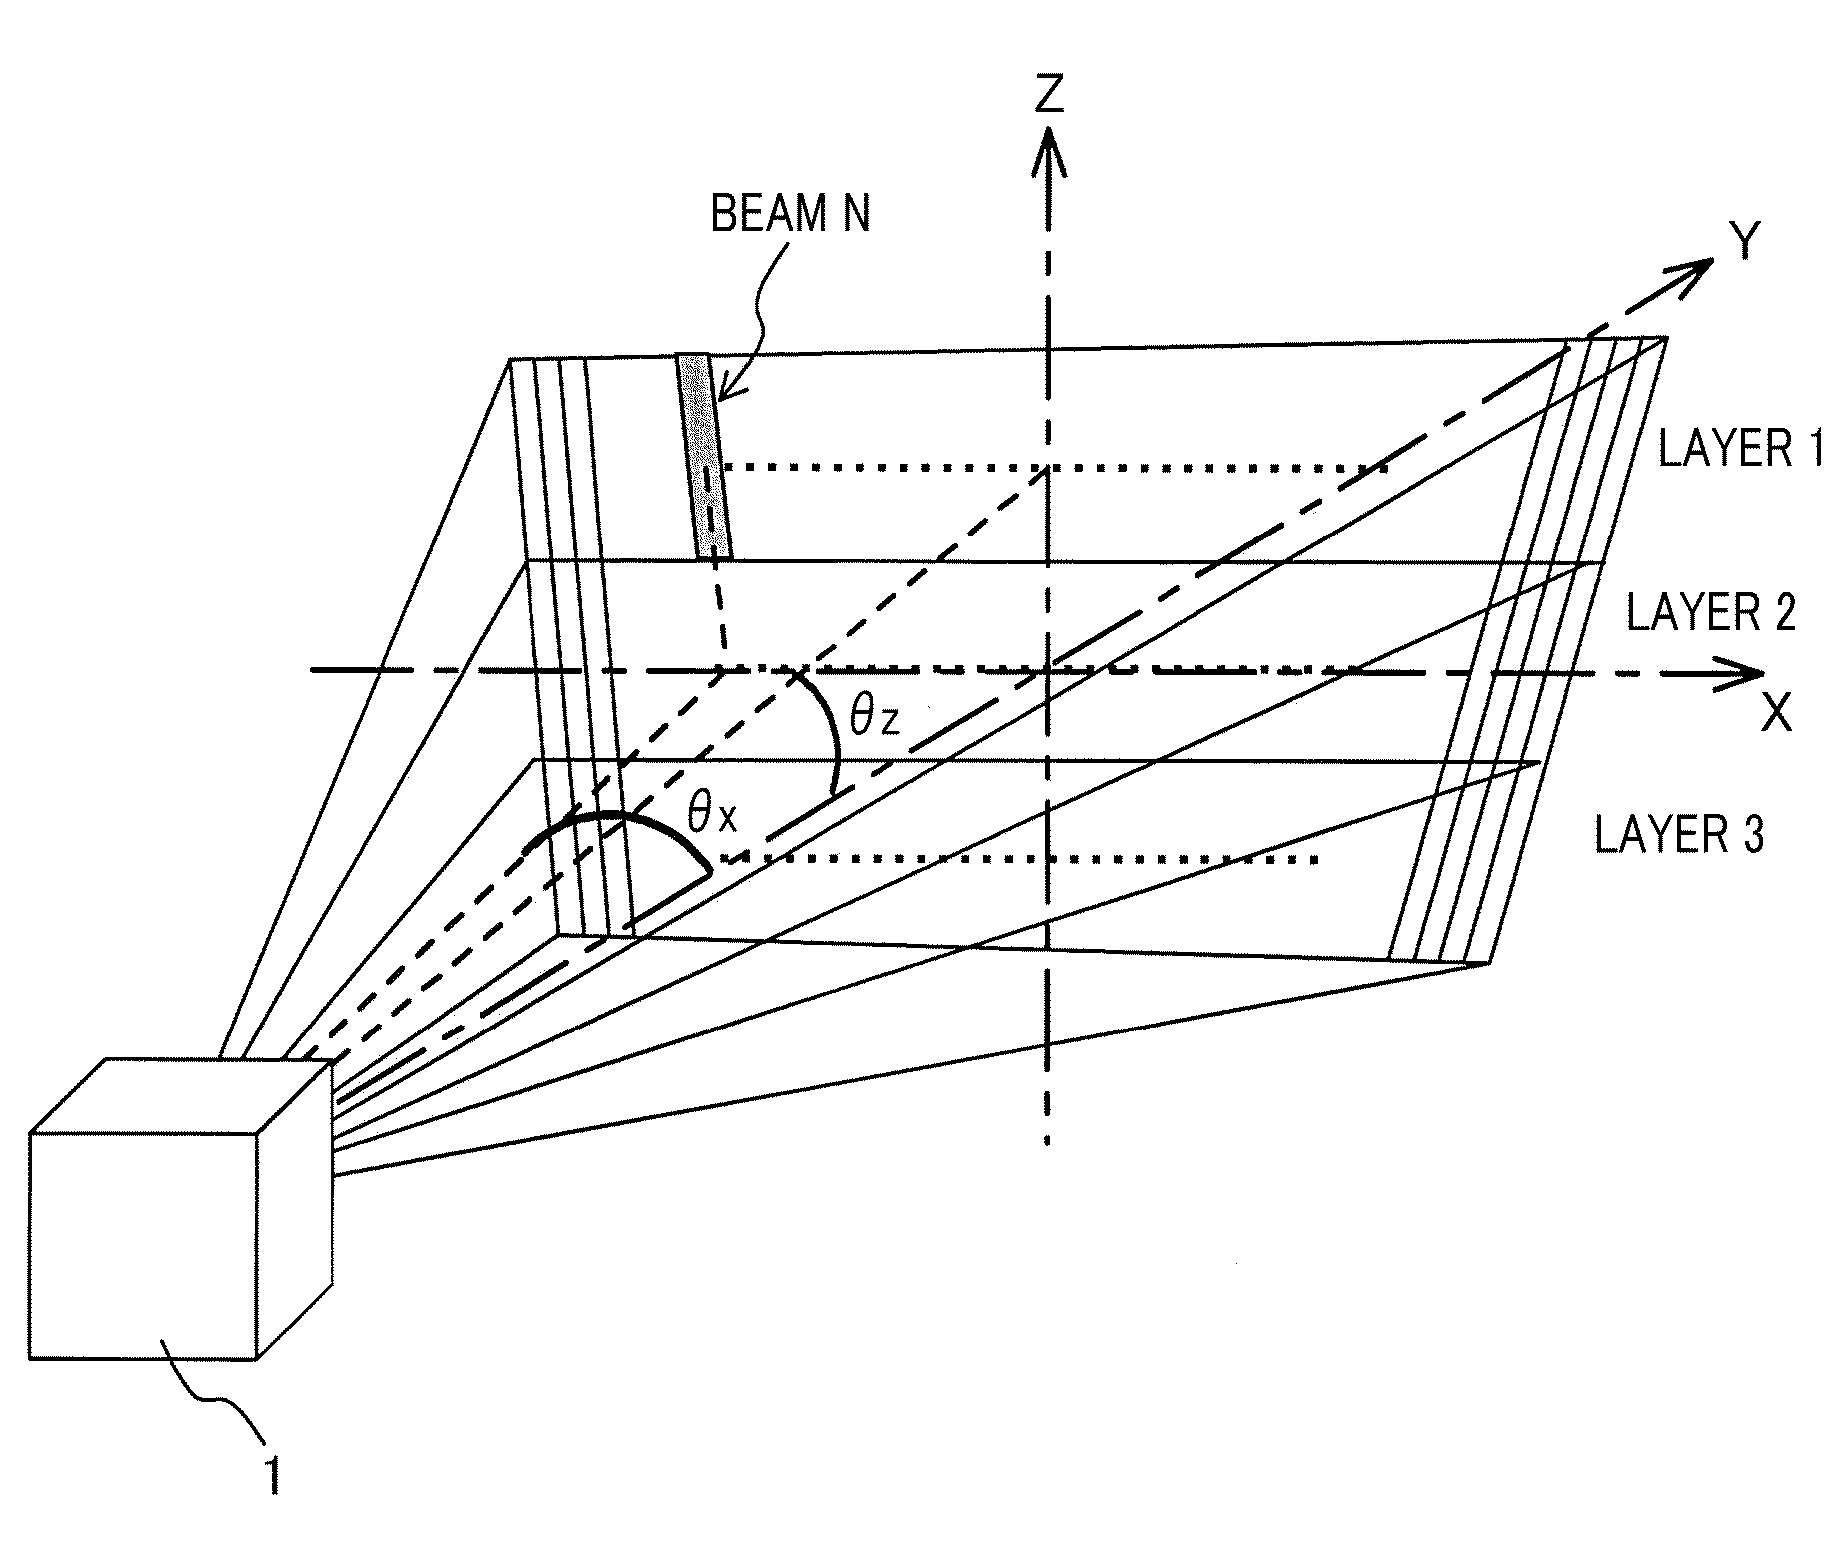 Apparatus and method of recognizing presence of objects